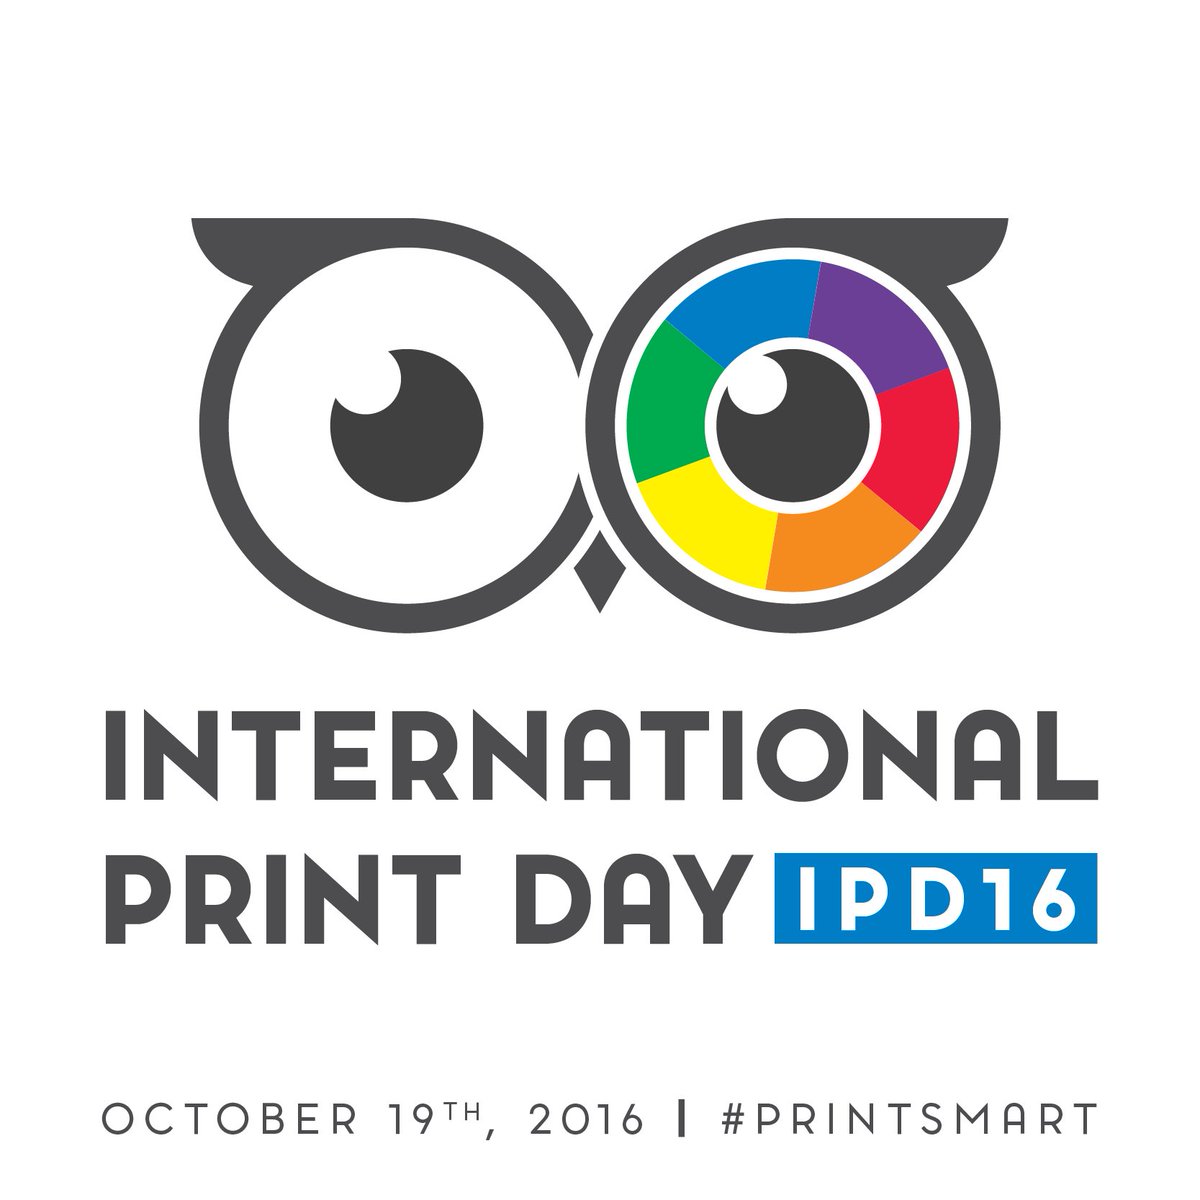 Today is International Print Day! Learn more here: ipd.printmediacentr.com #IPD16 #PrintSmart